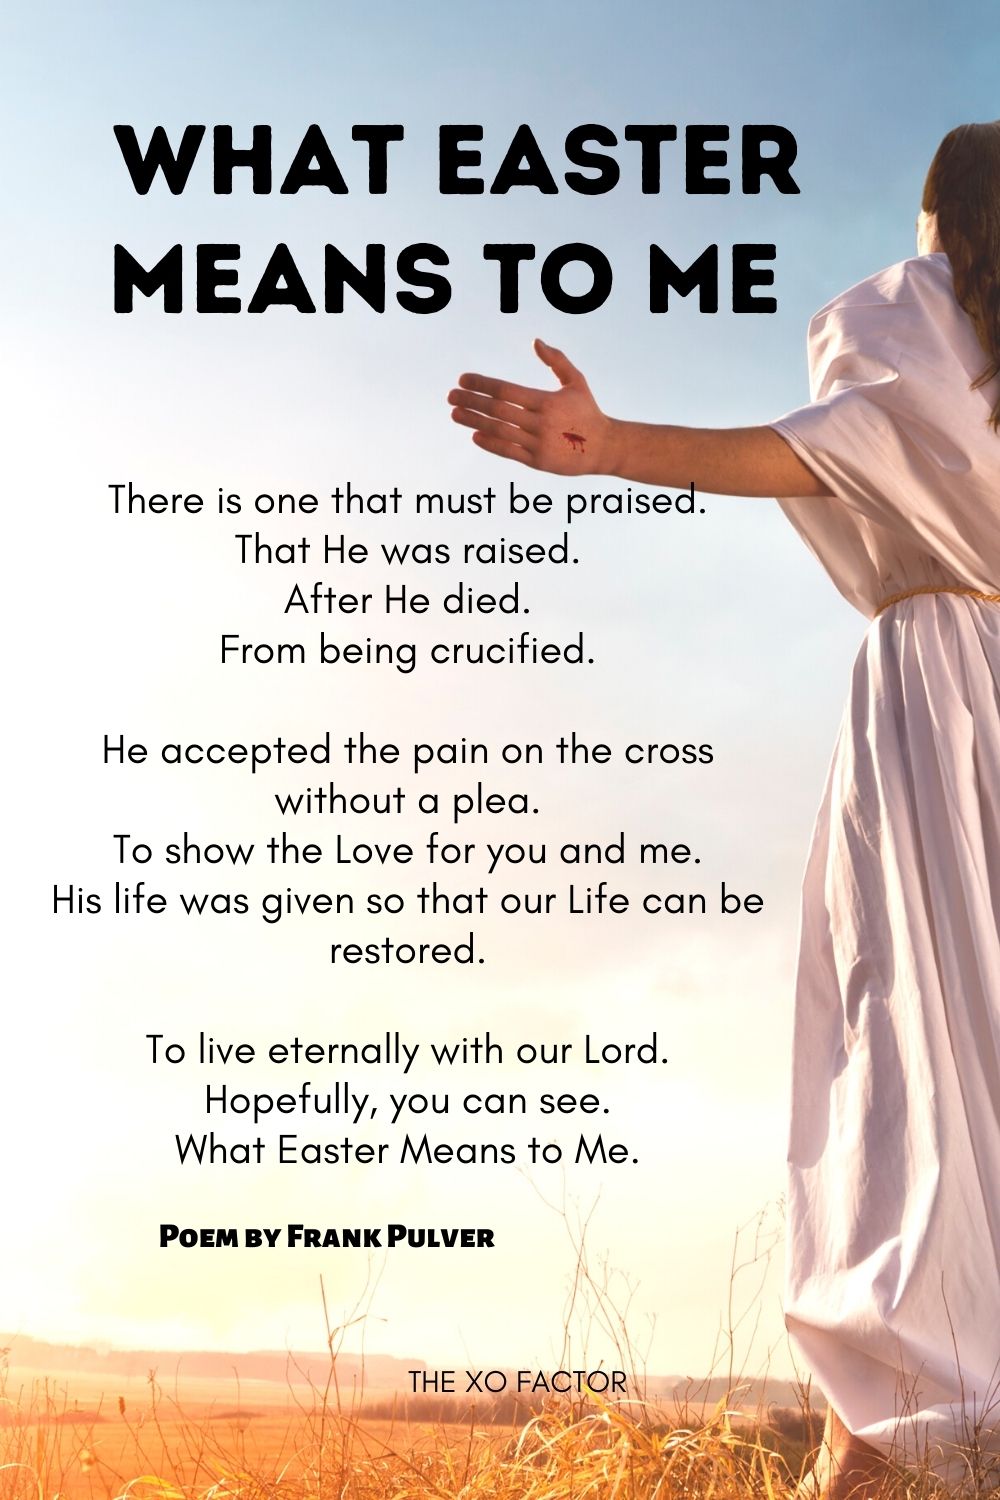 What Easter Means To Me Poem by Frank Pulver